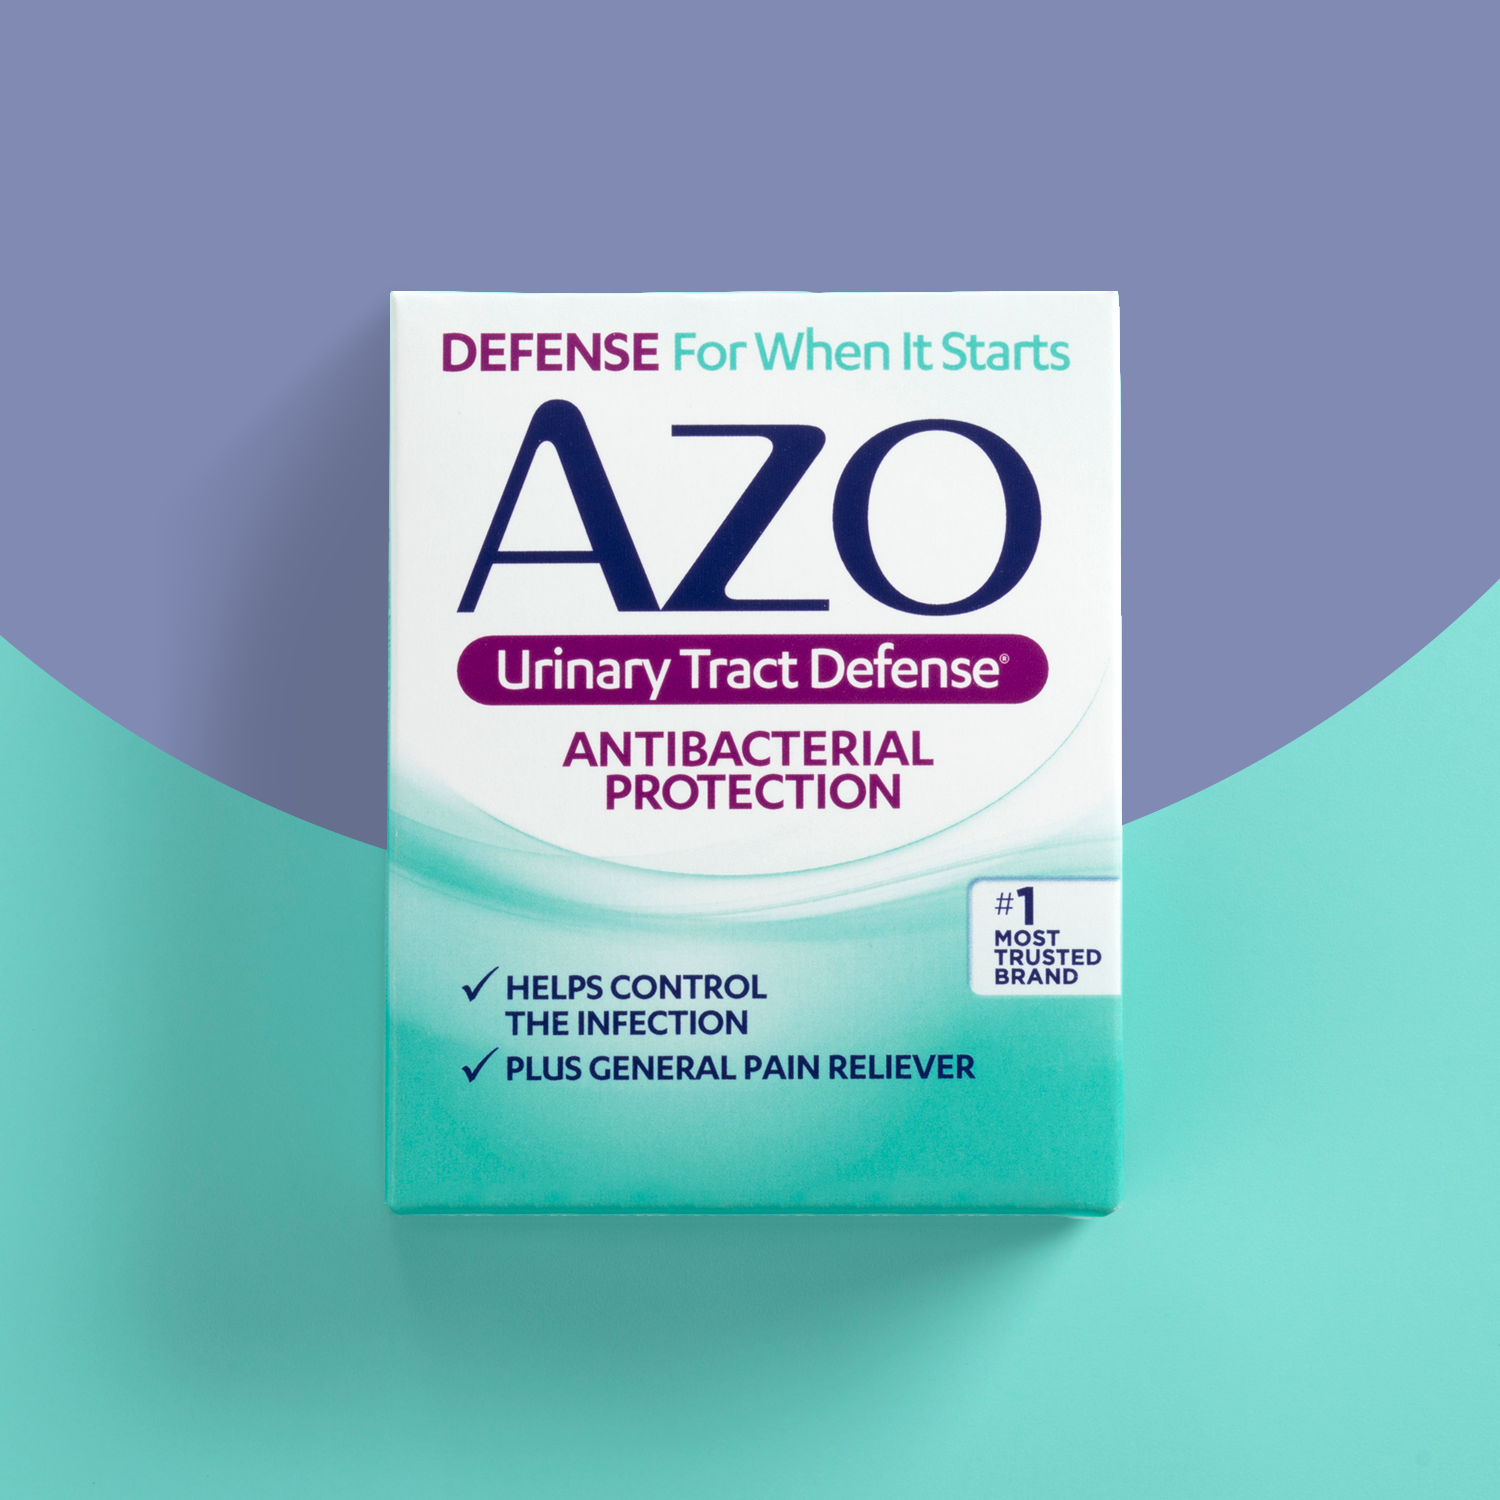 AZO Urinary Tract Defense Antibacterial Protection, 23 oz, 24 Tablets - image 4 of 9